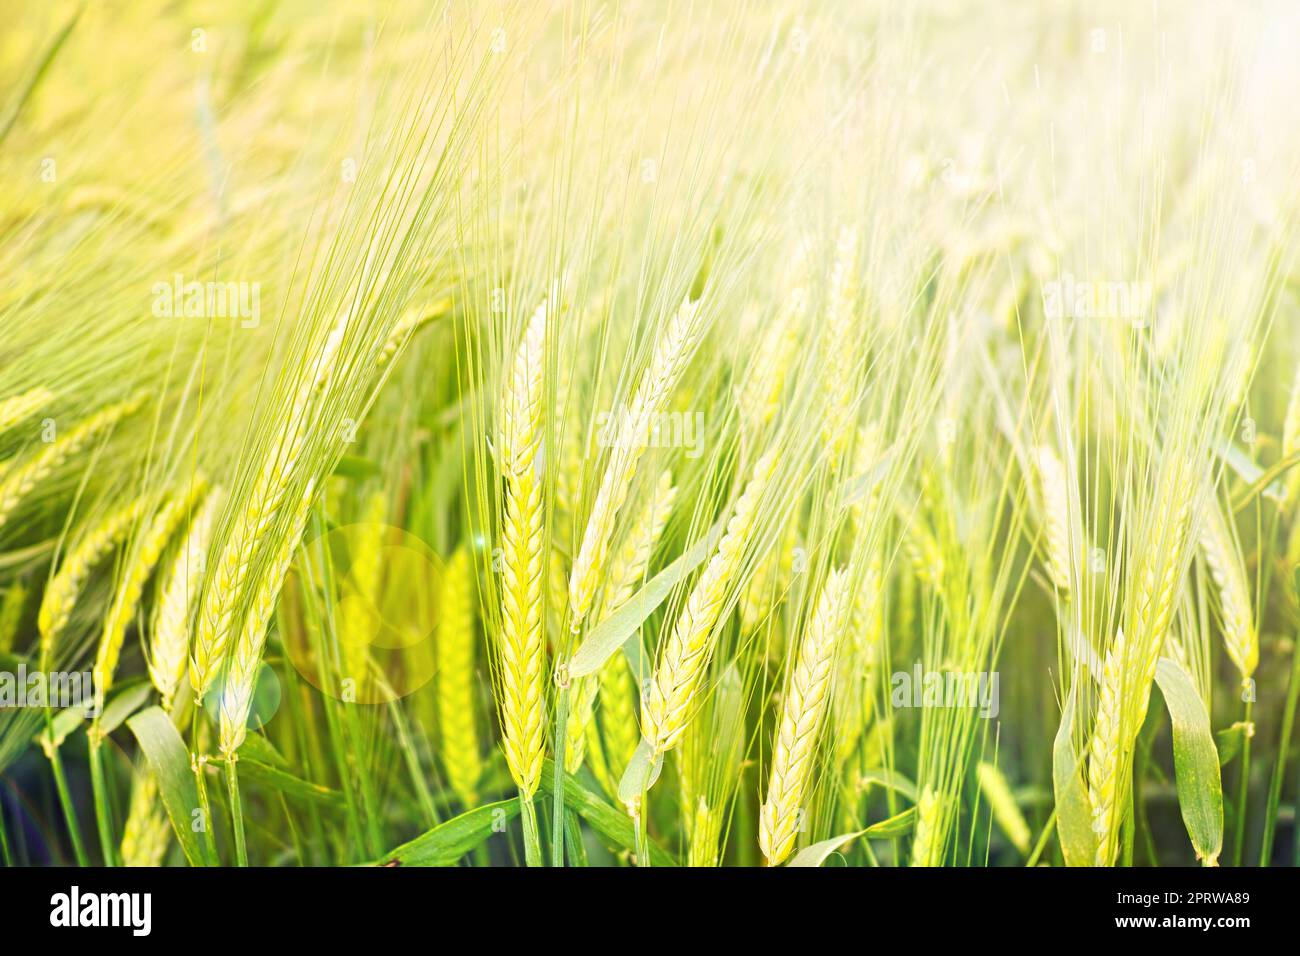 Natures ripe harvest - Wheat. Ripe wheat - ready for harvesting. Stock Photo